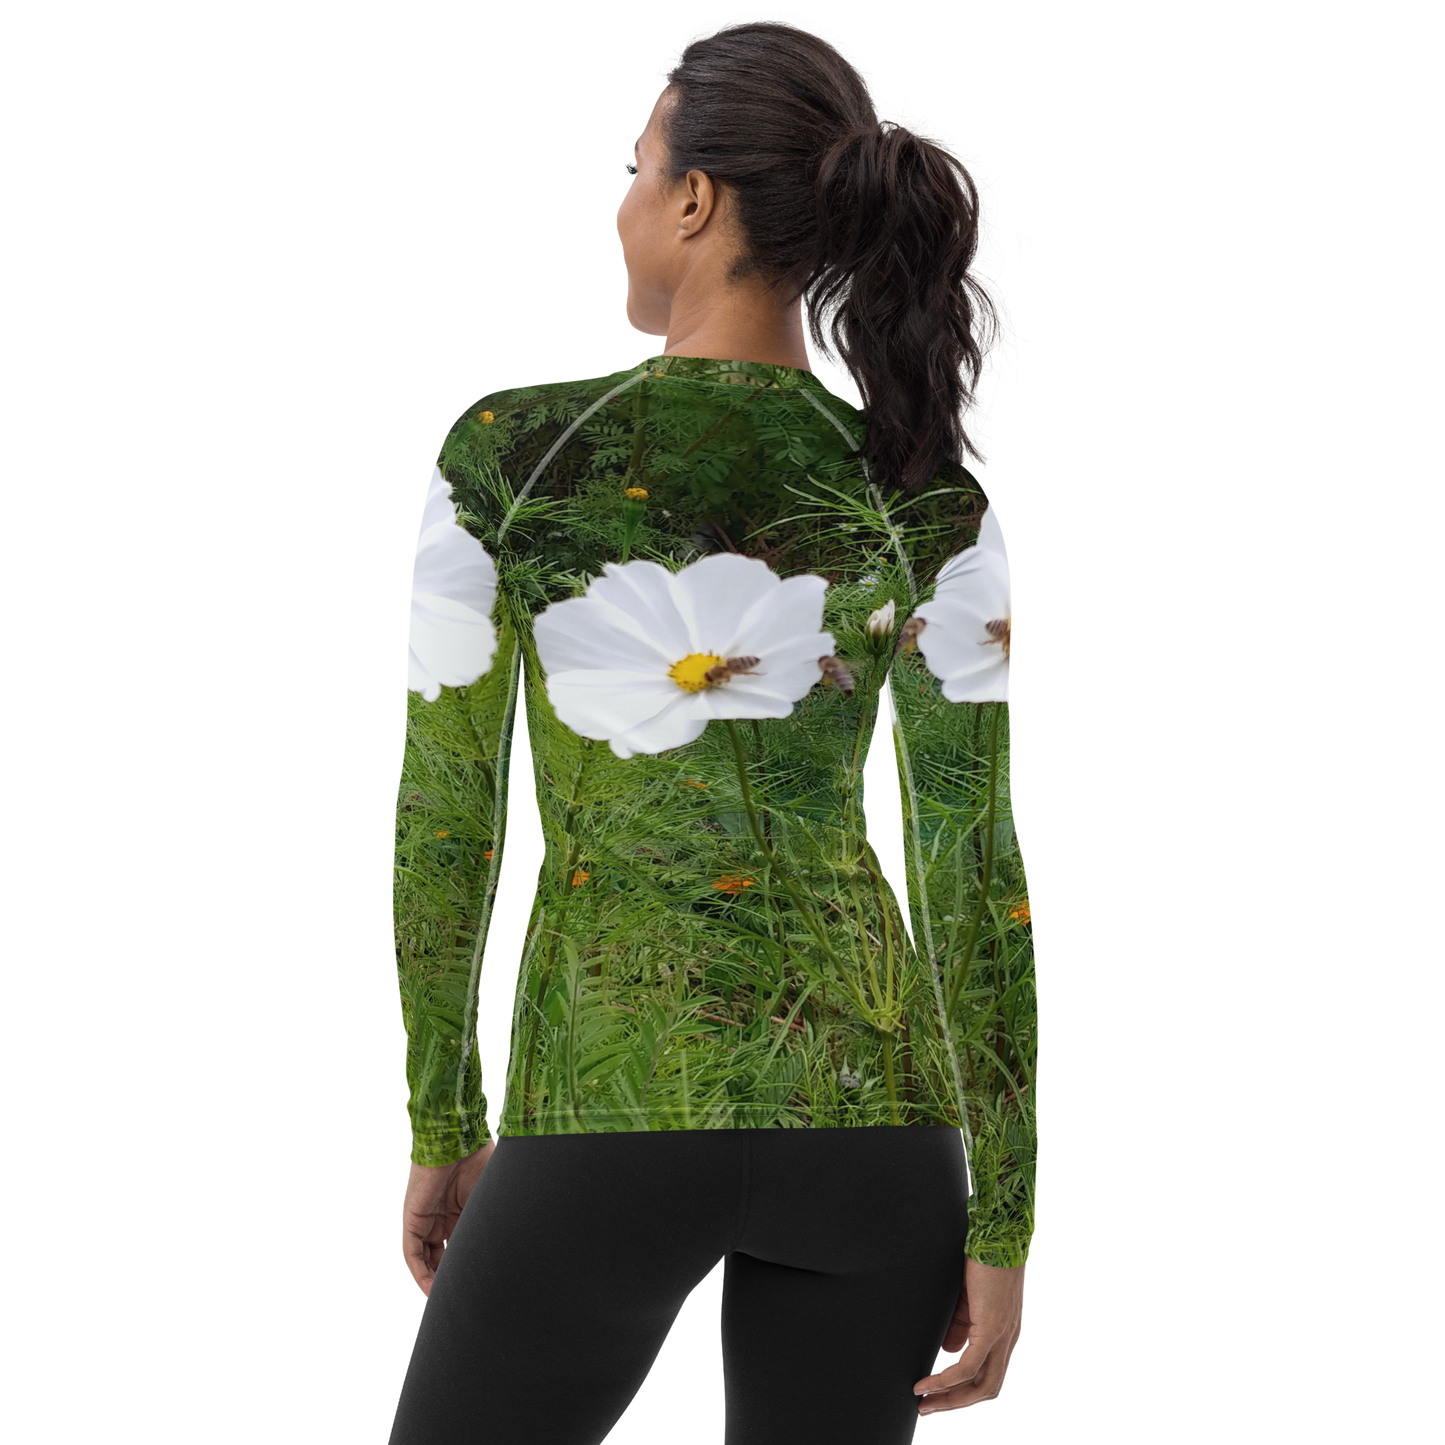 The FLOWER LOVE Collection - "Captivating Cosmos" Design Luxurious Women's Rash Guard, Sun Protective Clothing, Sports & Fitness Clothing